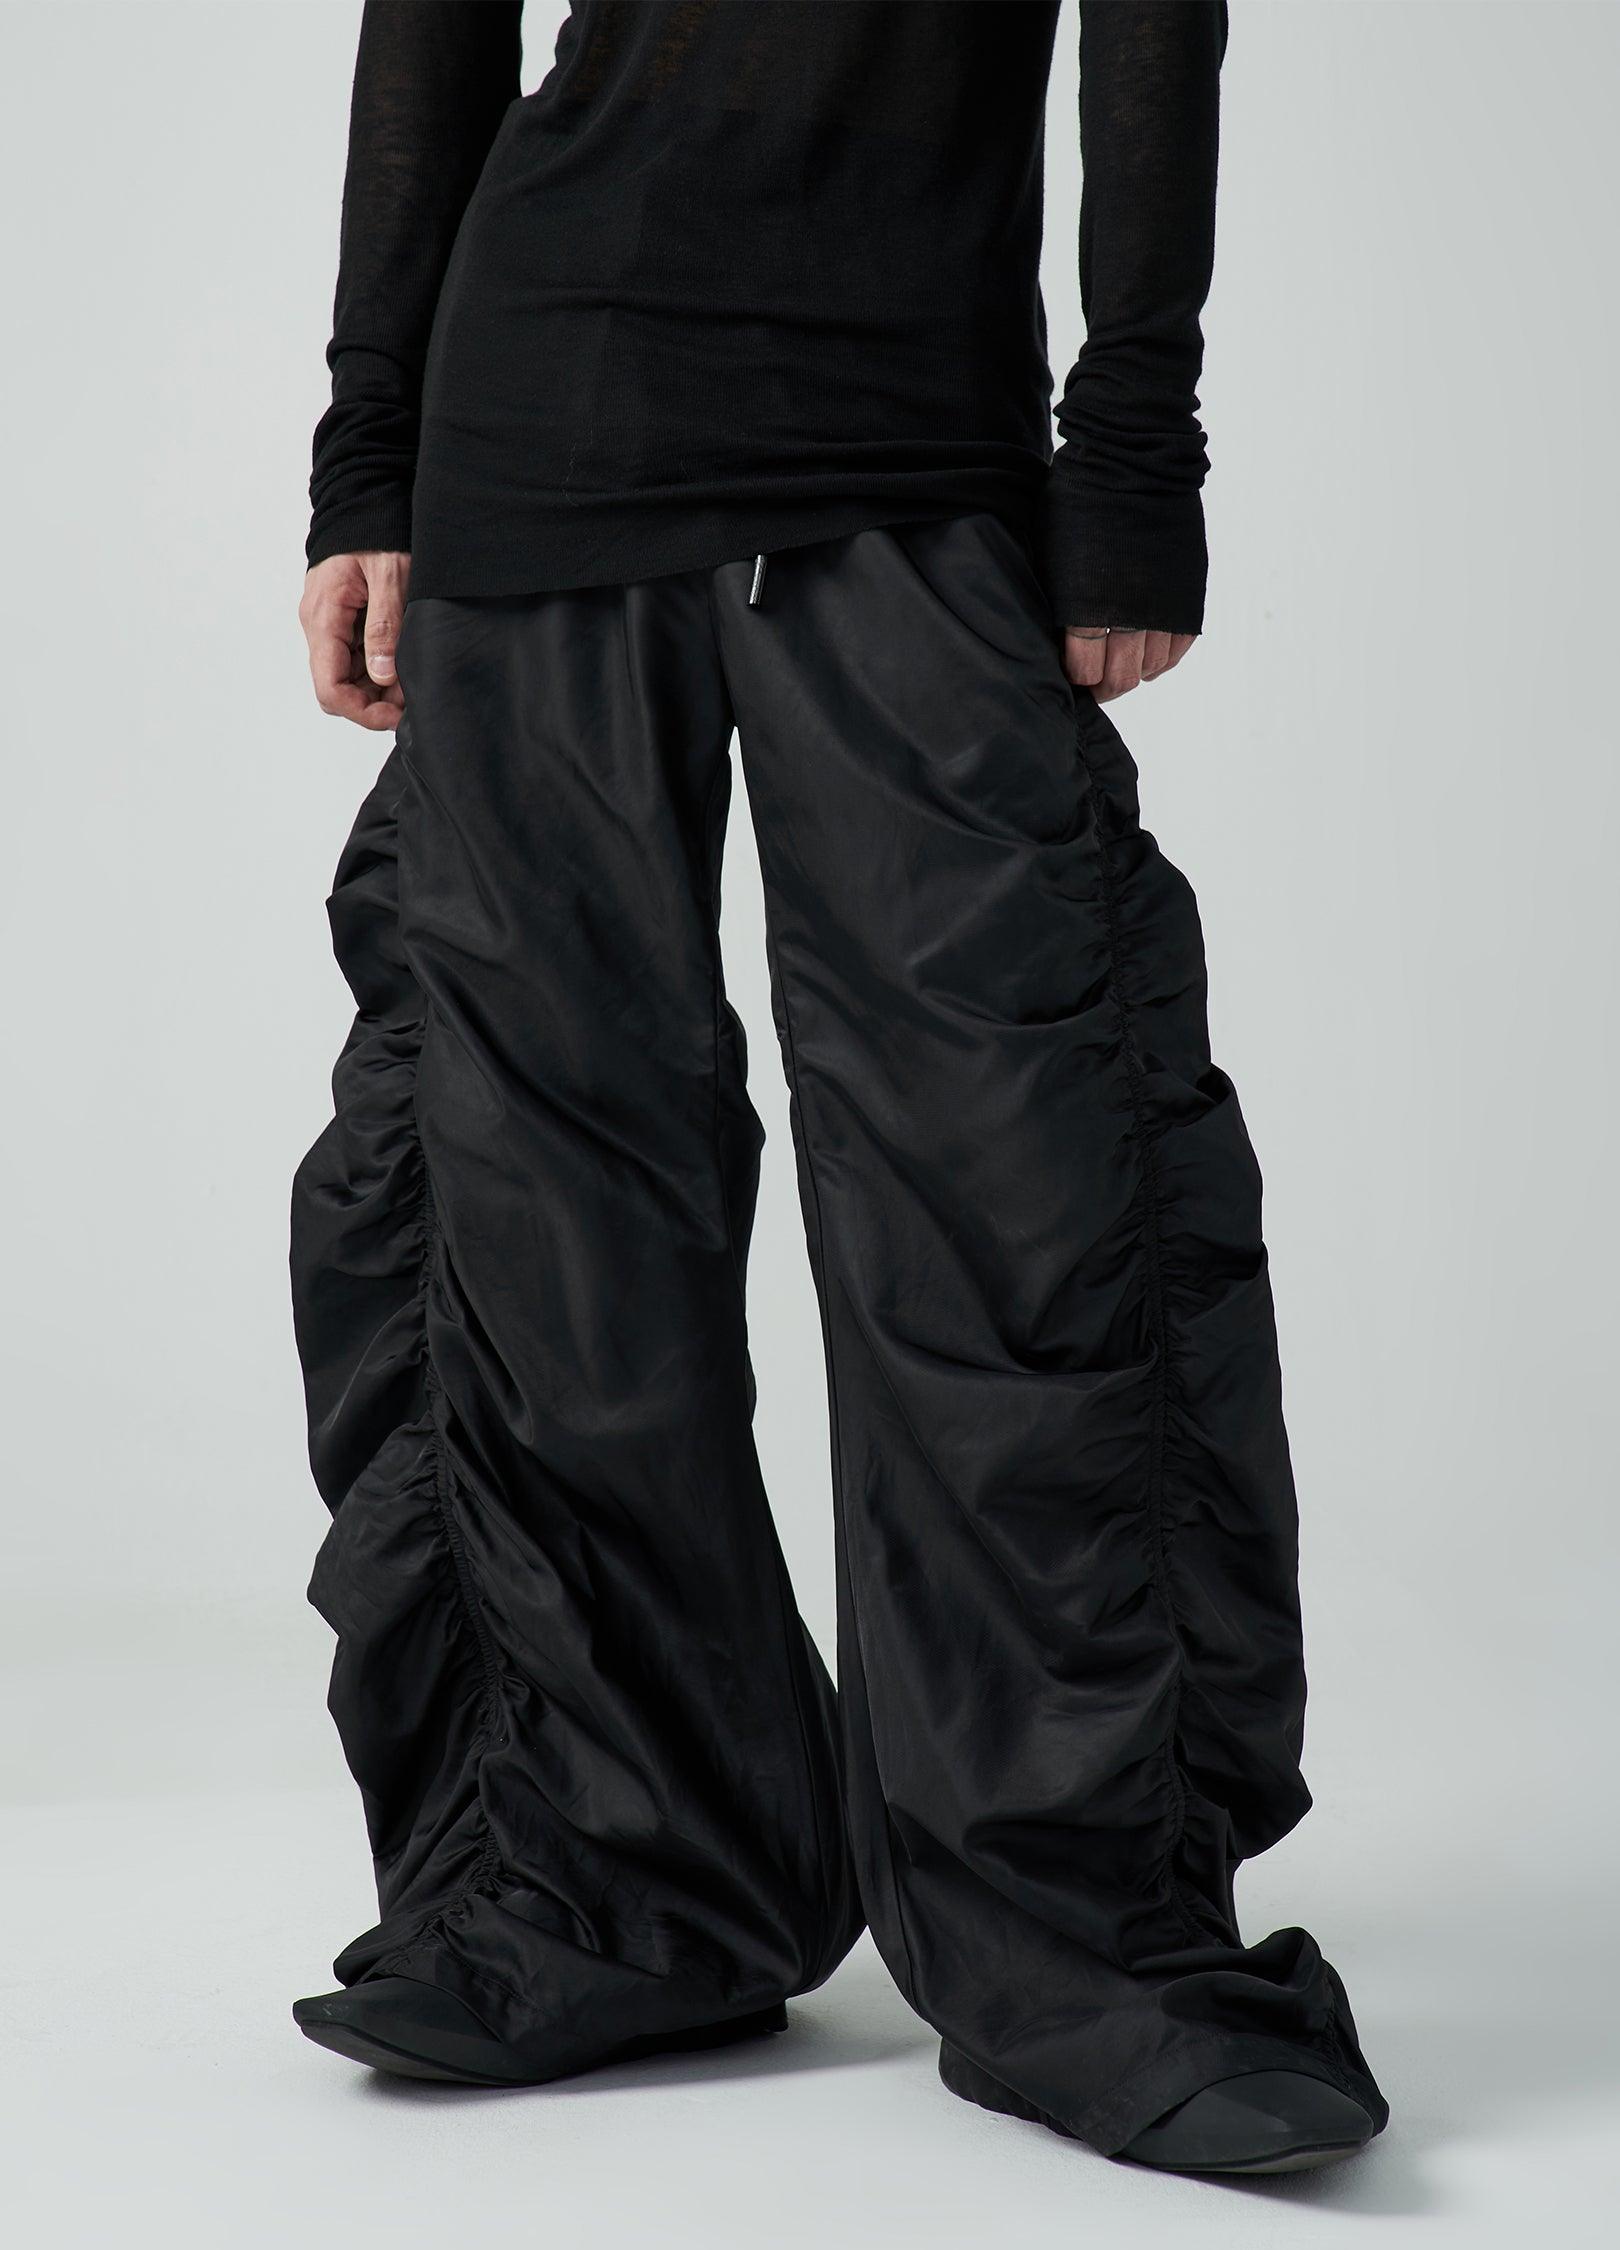 Parachute Wave Trousers by FRKM SCDF - chiclara